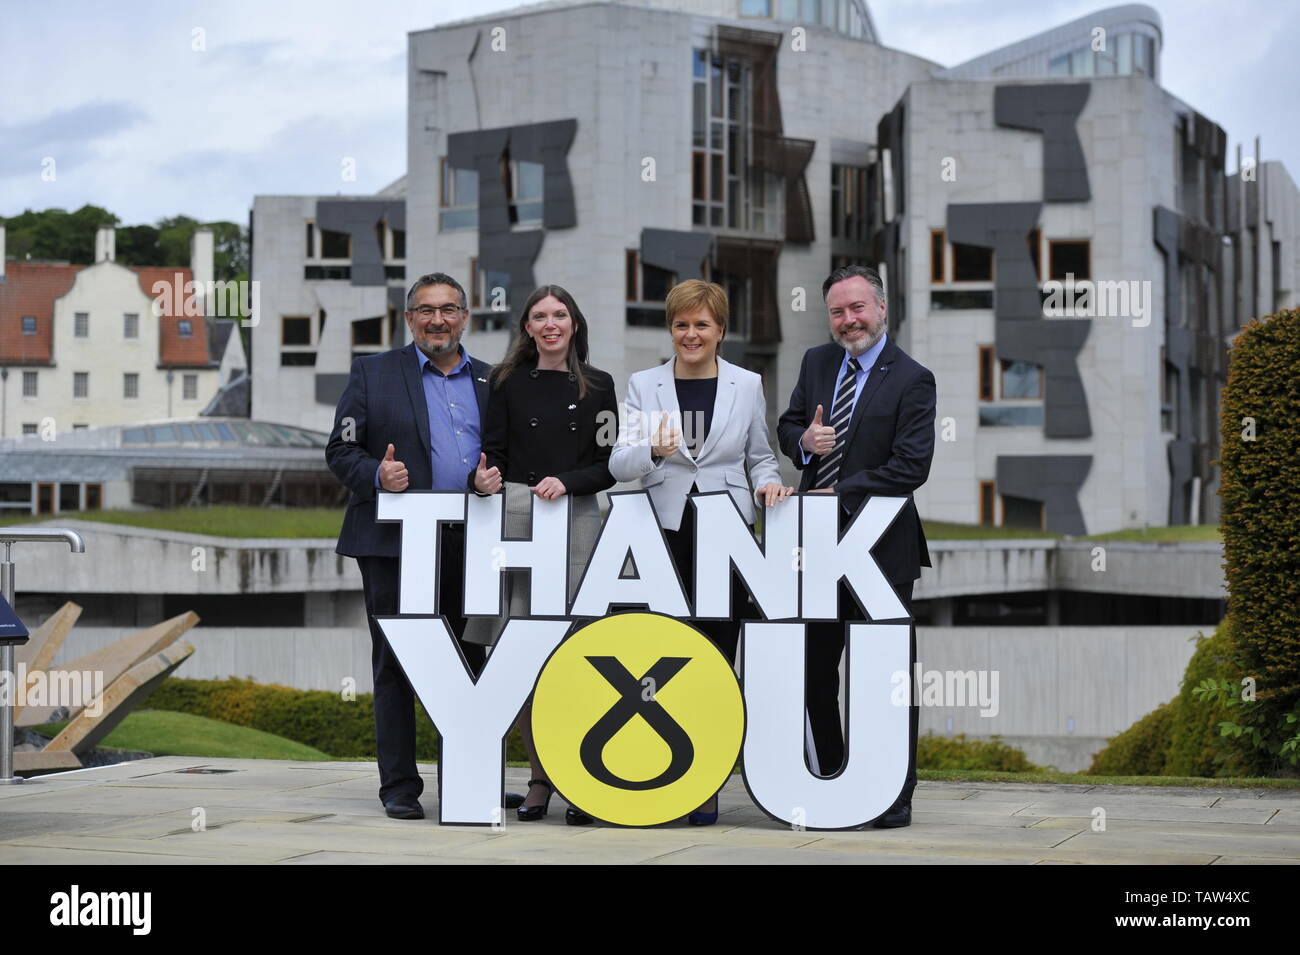 Edinburgh, UK. 28th May, 2019. PICTURED: (left-right) Christian Allard; Aileen McLEod; Nicola Sturgeon; Alyn Smith. SNP Leader Nicola Sturgeon welcomes the three newly elected SNP MEPs - Alyn Smith, Christian Allard and Aileen McLeod - following the party's emphatic victory in the European parliament elections. Ms Sturgeon said: “Scotland said no to Brexit in 2016. This emphatic result makes clear, we meant it. “These three first class SNP MEPs will work tirelessly to keep Scotland in Europe, stop Brexit and make Scotland's voice heard at every turn. Credit: Colin Fisher/Alamy Live News Stock Photo